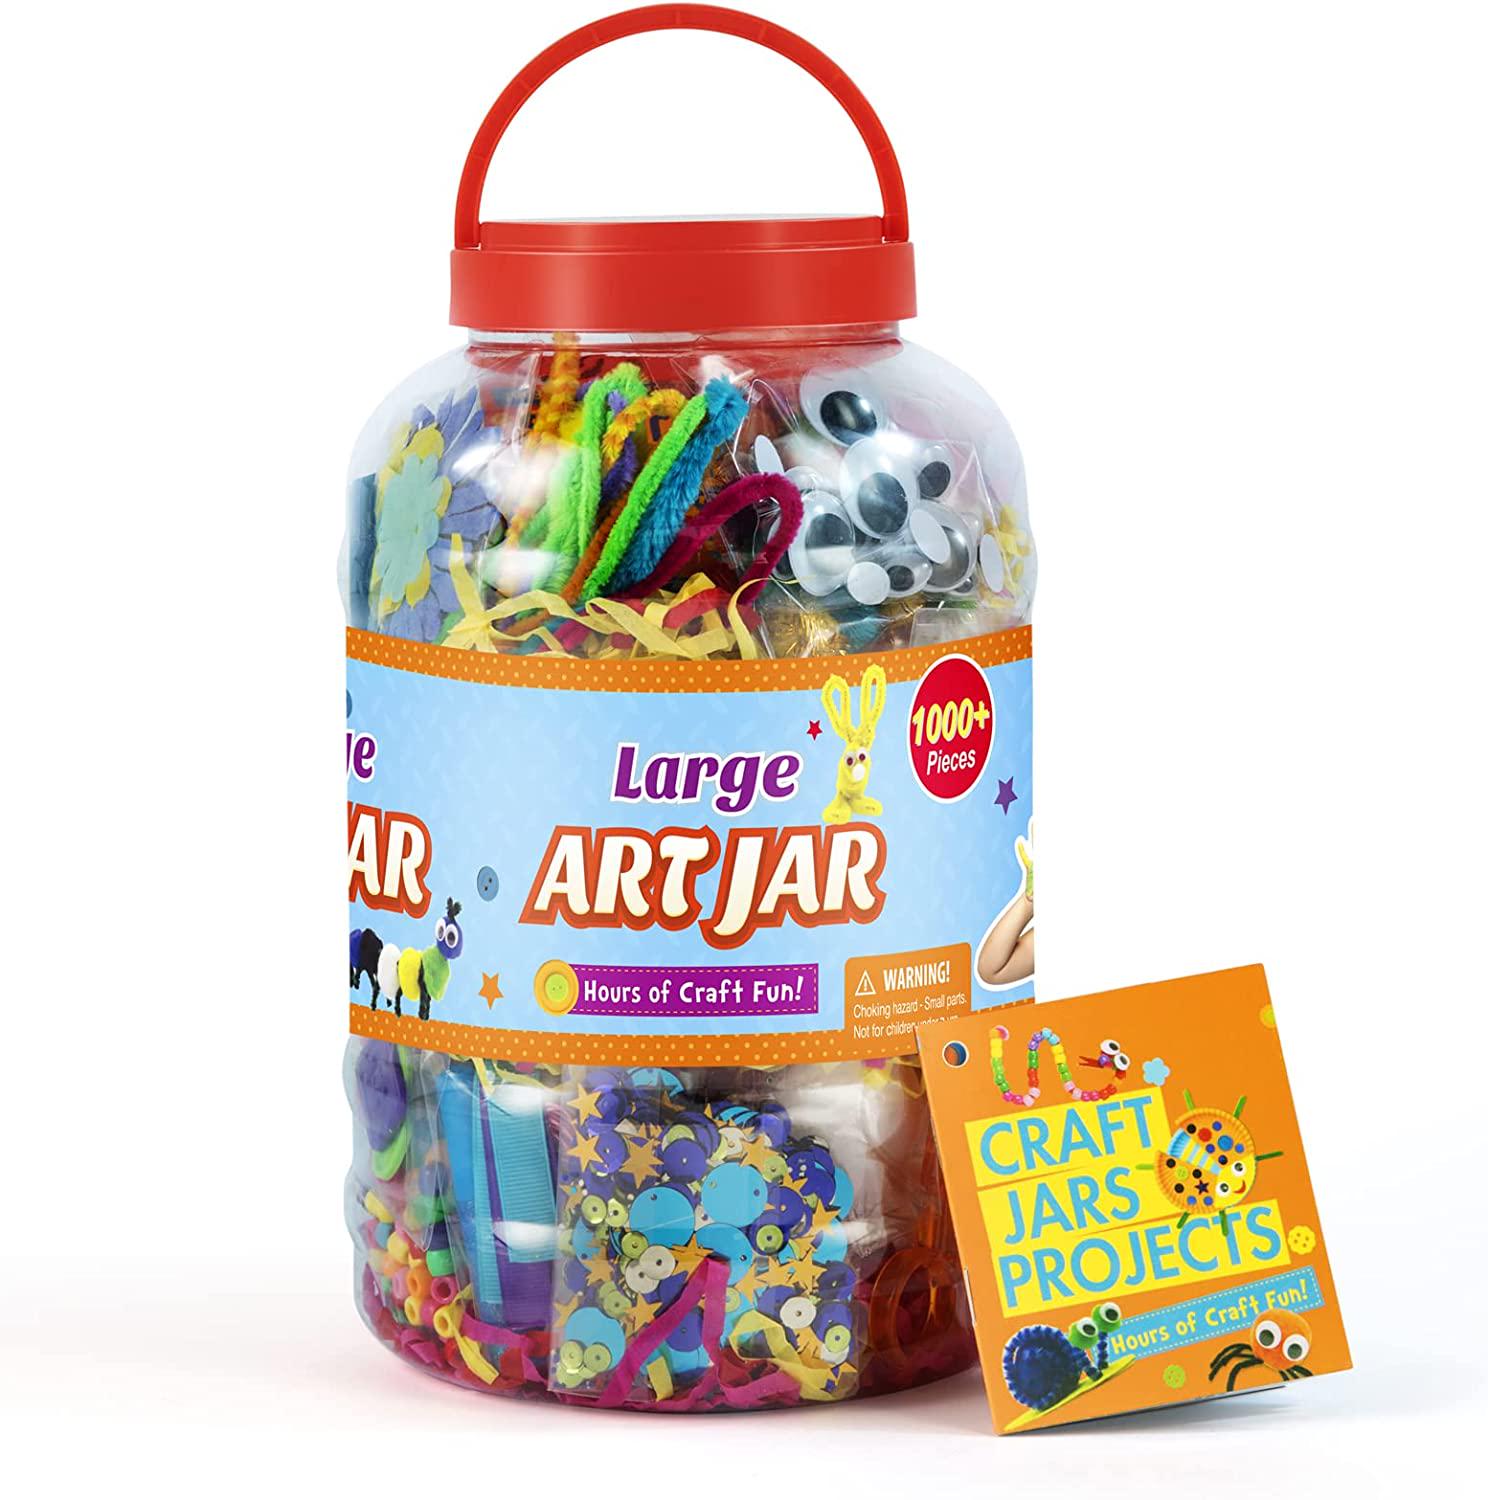 KEVIN&SASA CRAFTS, Large Art Jar, Kids Craft and Art Supplies, 1000 More Pieces All in One Craft Jars Projects for Kids, School Kindergarten Homeschool Crafts Supplies Gift Set